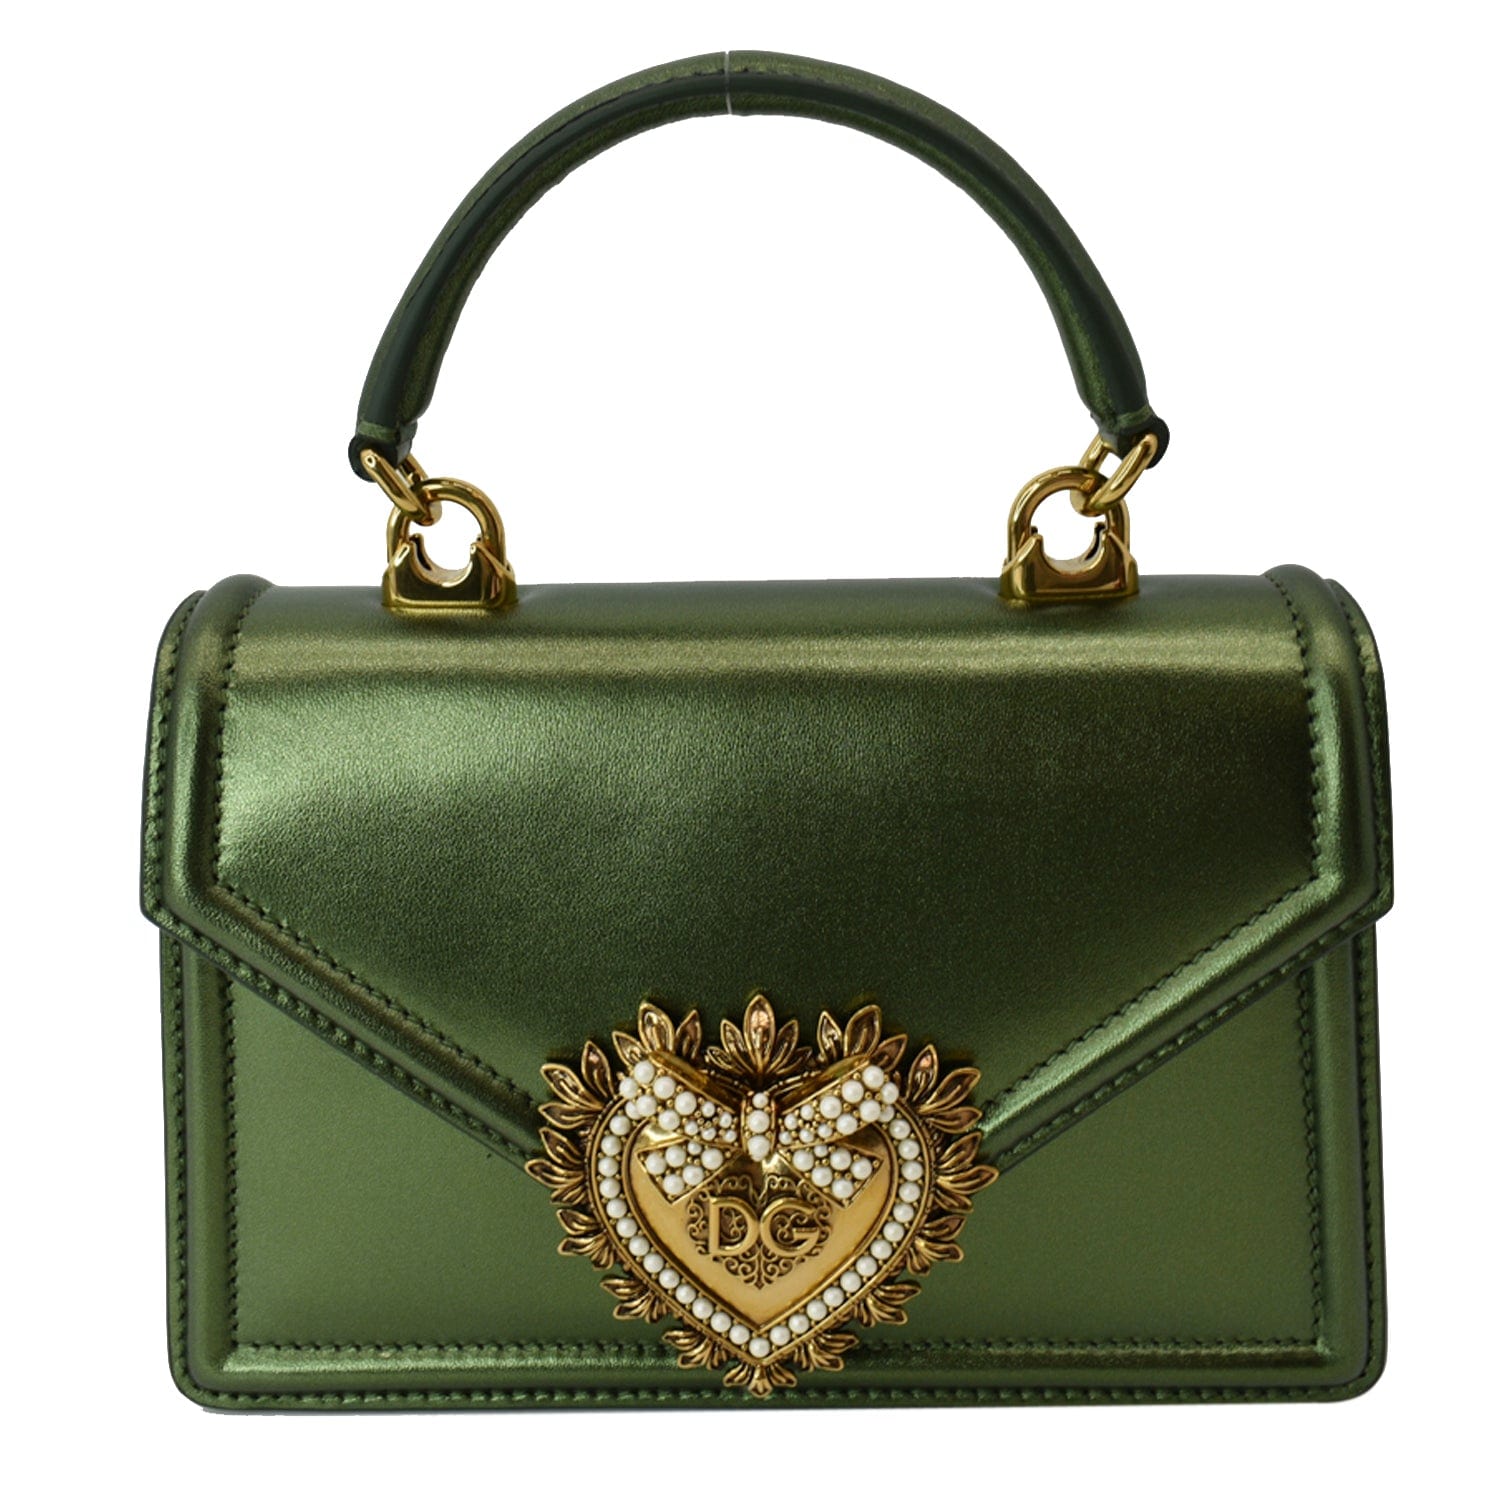 Dolce & Gabbana Medium Devotion Bag In Quilted Nappa Mordoré in Green